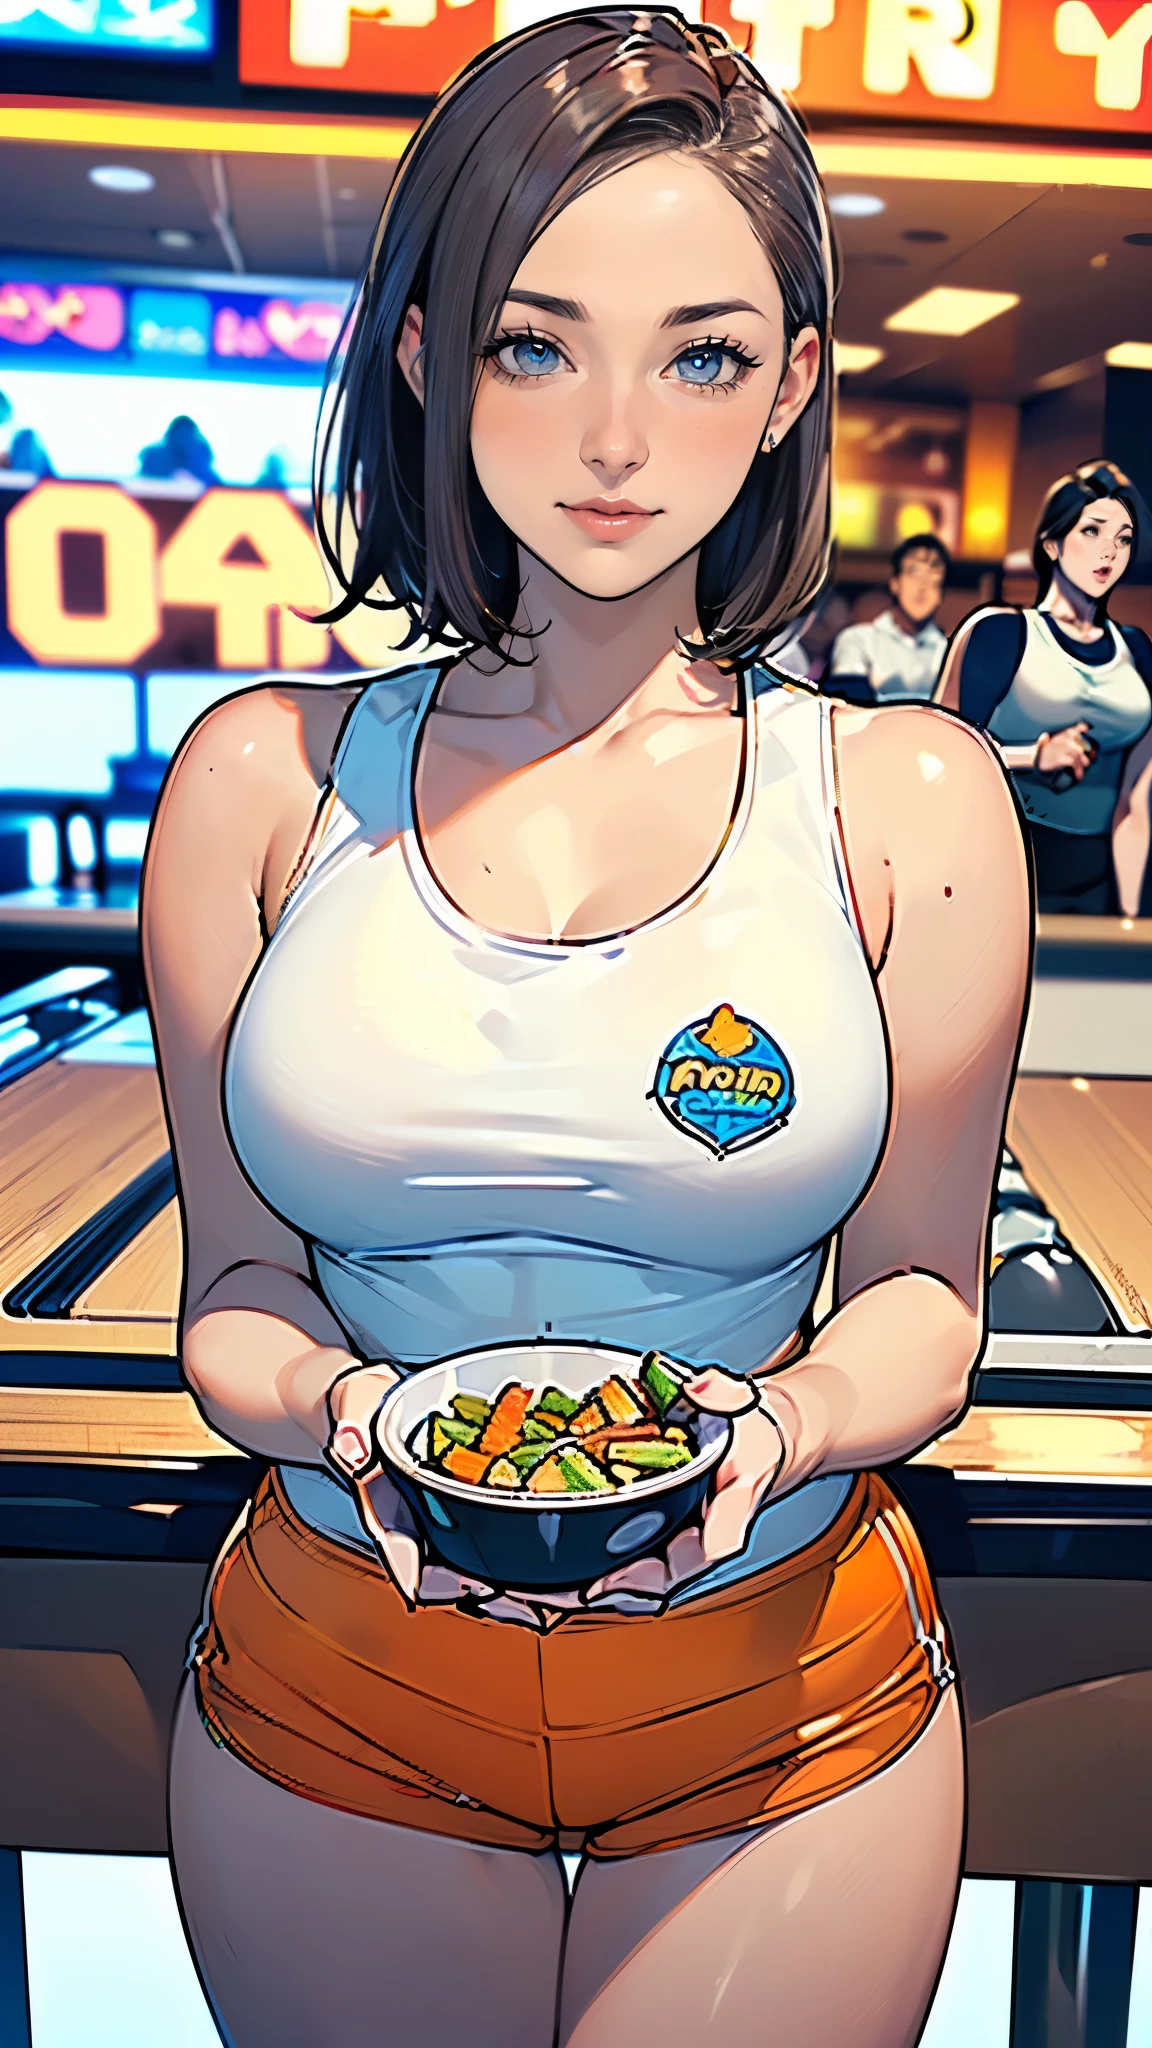 masterpiece,highest quality,Very detailed,High resolution,8k,wallpaper,Perfect lighting,BREAK(One Woman),(Mature woman working as a waiter at a sports bar:1.5),(48 years old),(hooters),(((A very form fitting white tank top:1.5))),((The tank top has the logo of a sports bar on it.:1.5)),(((tiny orange shorts))),(((Very detailed costume drawings:1.5))),(Beautiful Eyes:1.5),(Detailed face drawing:1.5),(Detailed face drawing:1.5),((Very detailed female hand:1.5)),(Shiny skin:1.2),(Big Breasts:1.2),(Thick thighs:1.5),(Sensual body:1.5),(Sports bar background:1.5),(((Blur the background:1.5))),(((I&#39;m embarrassed:1.5)))